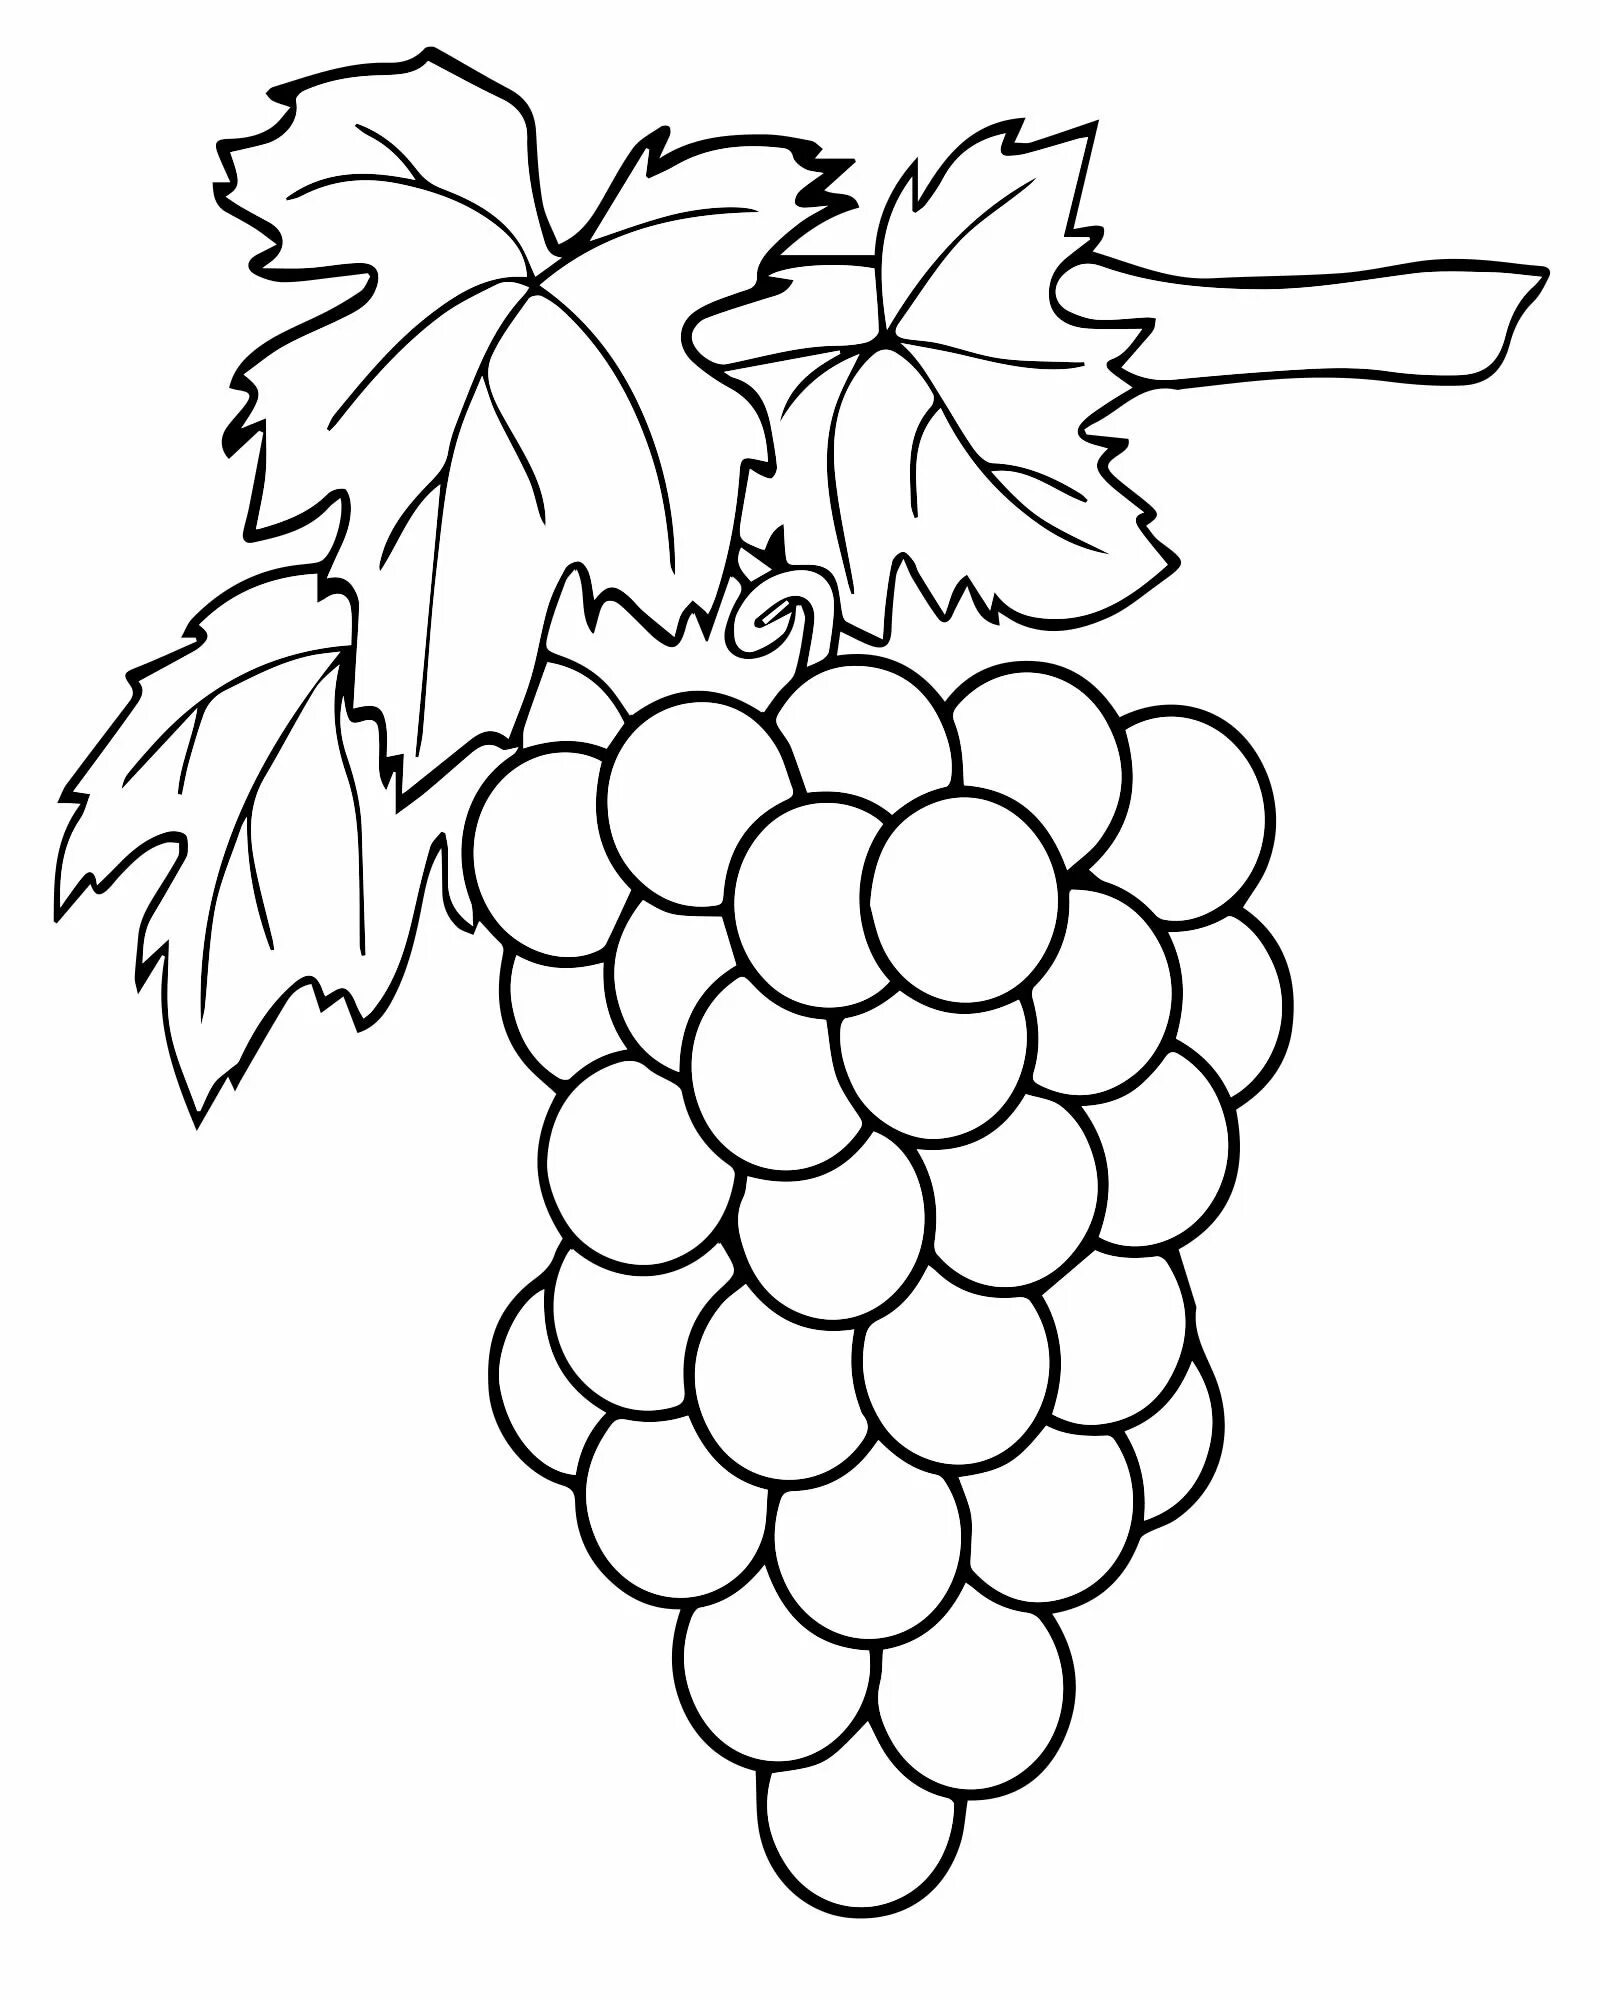 Coloring grapes for children 5-6 years old